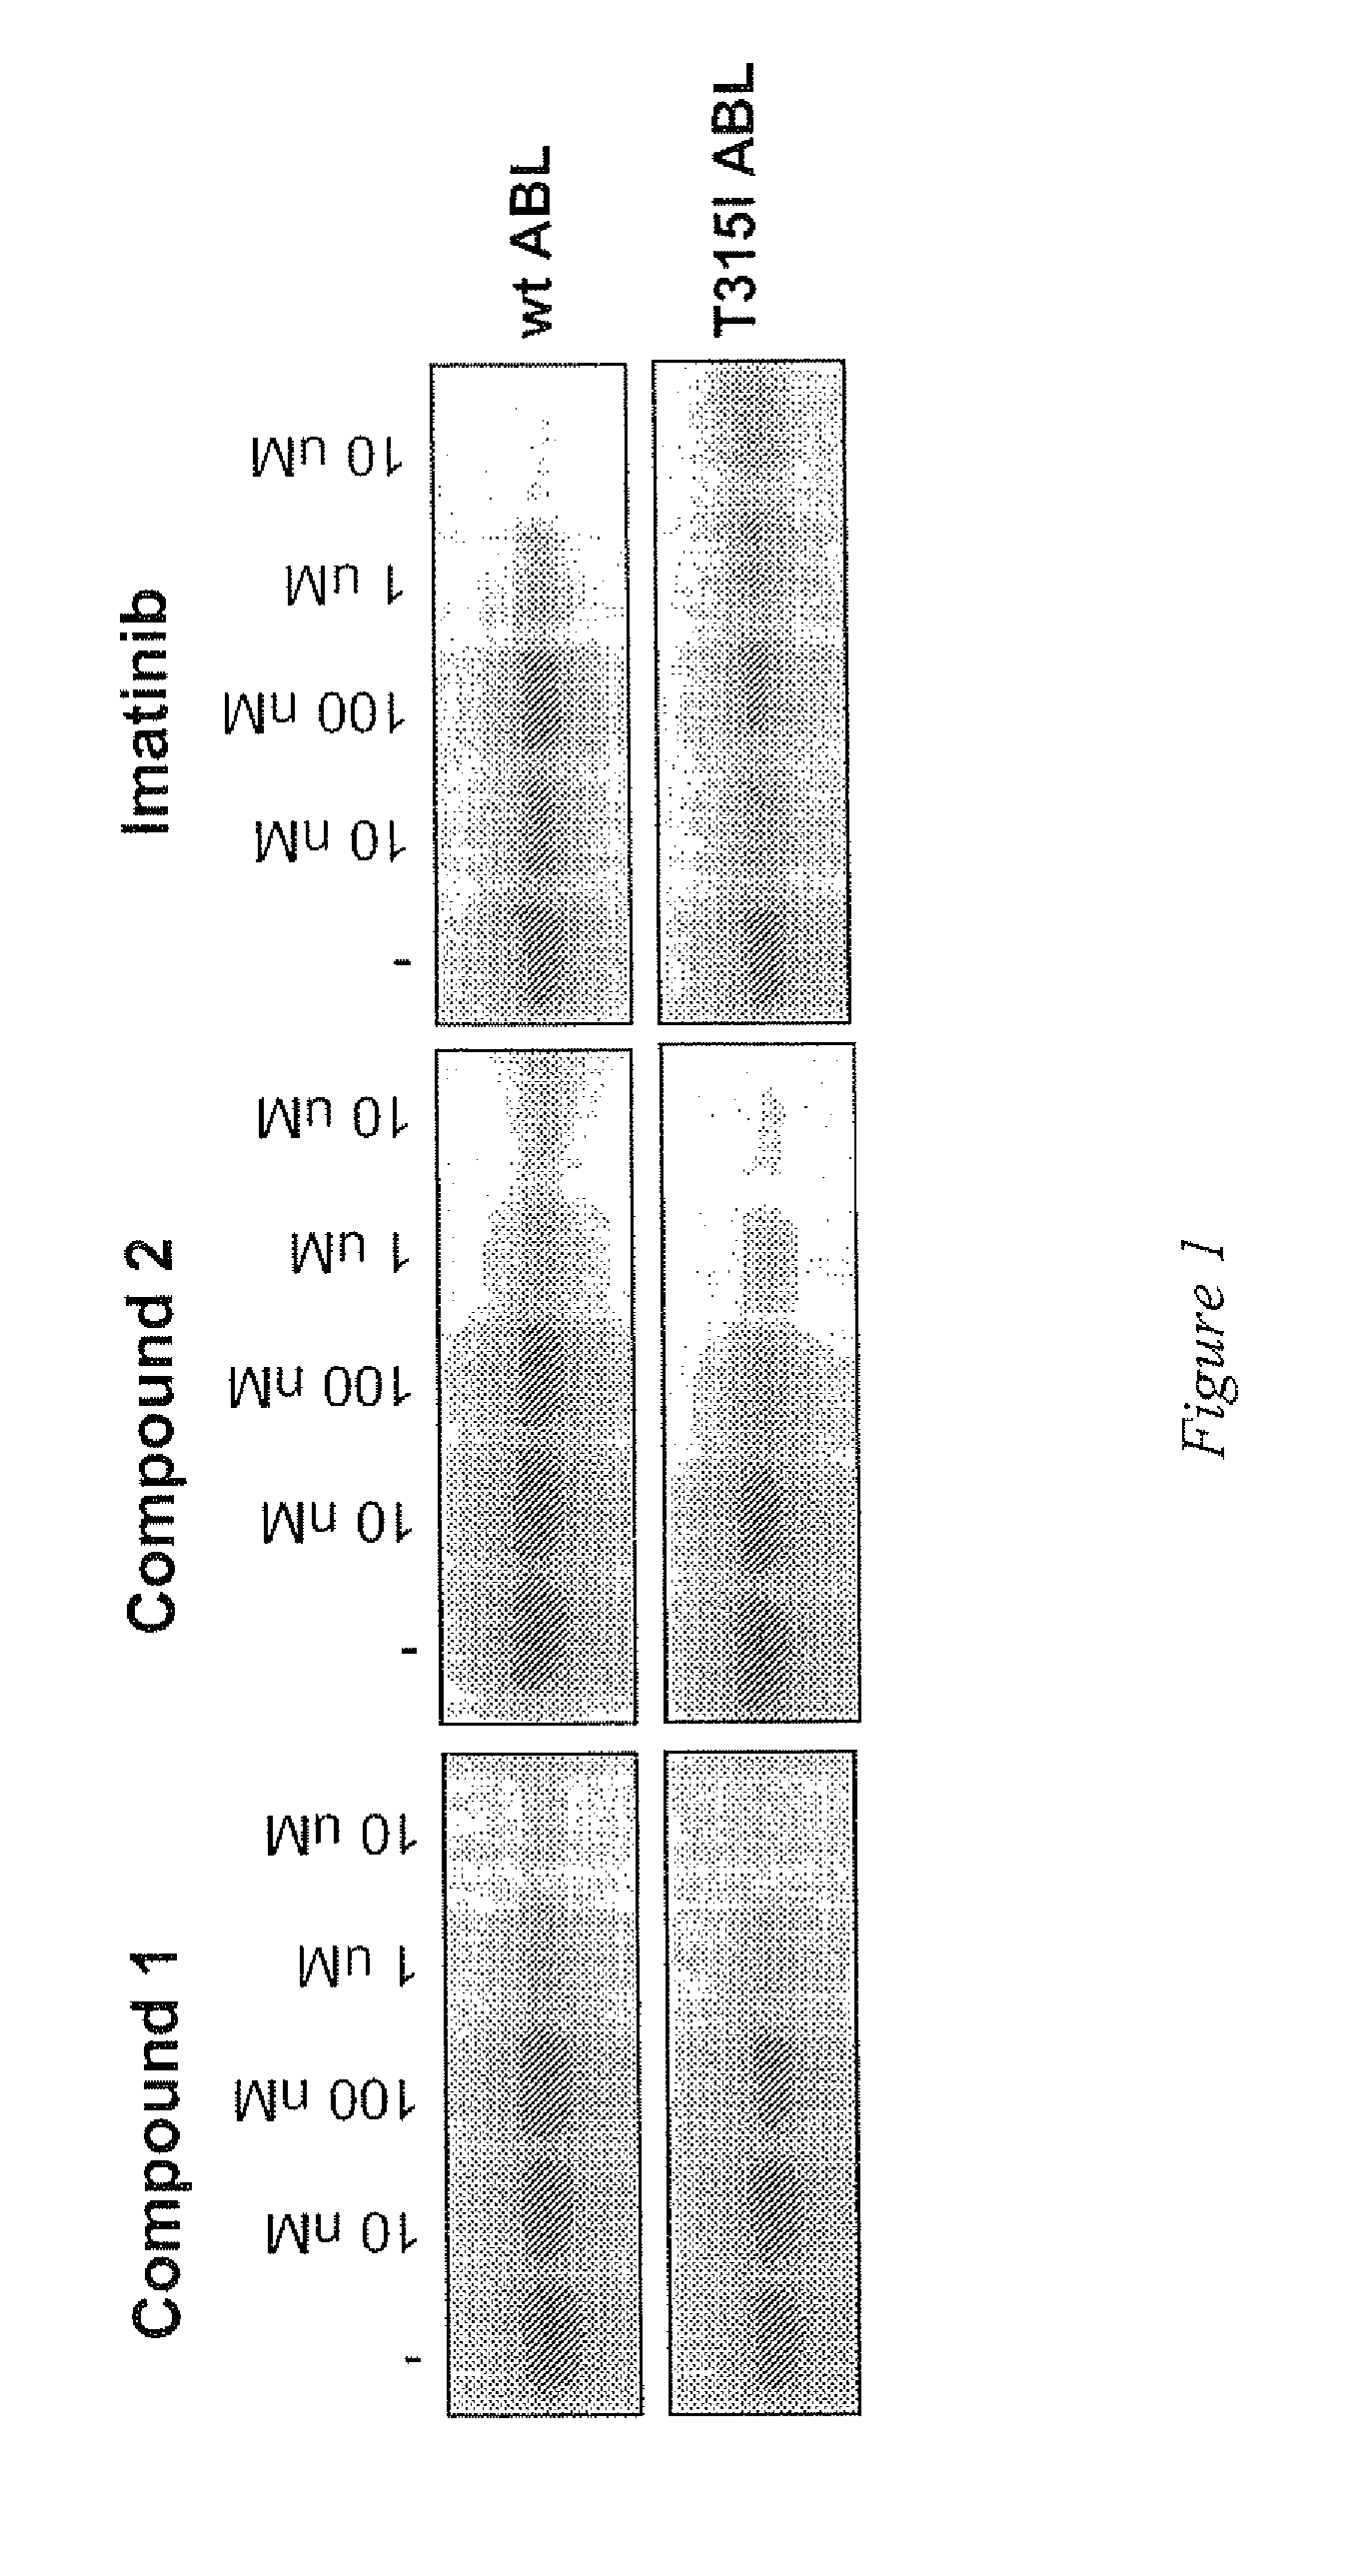 Use of a kinase inhibitor for the treatment of particular resistant tumors